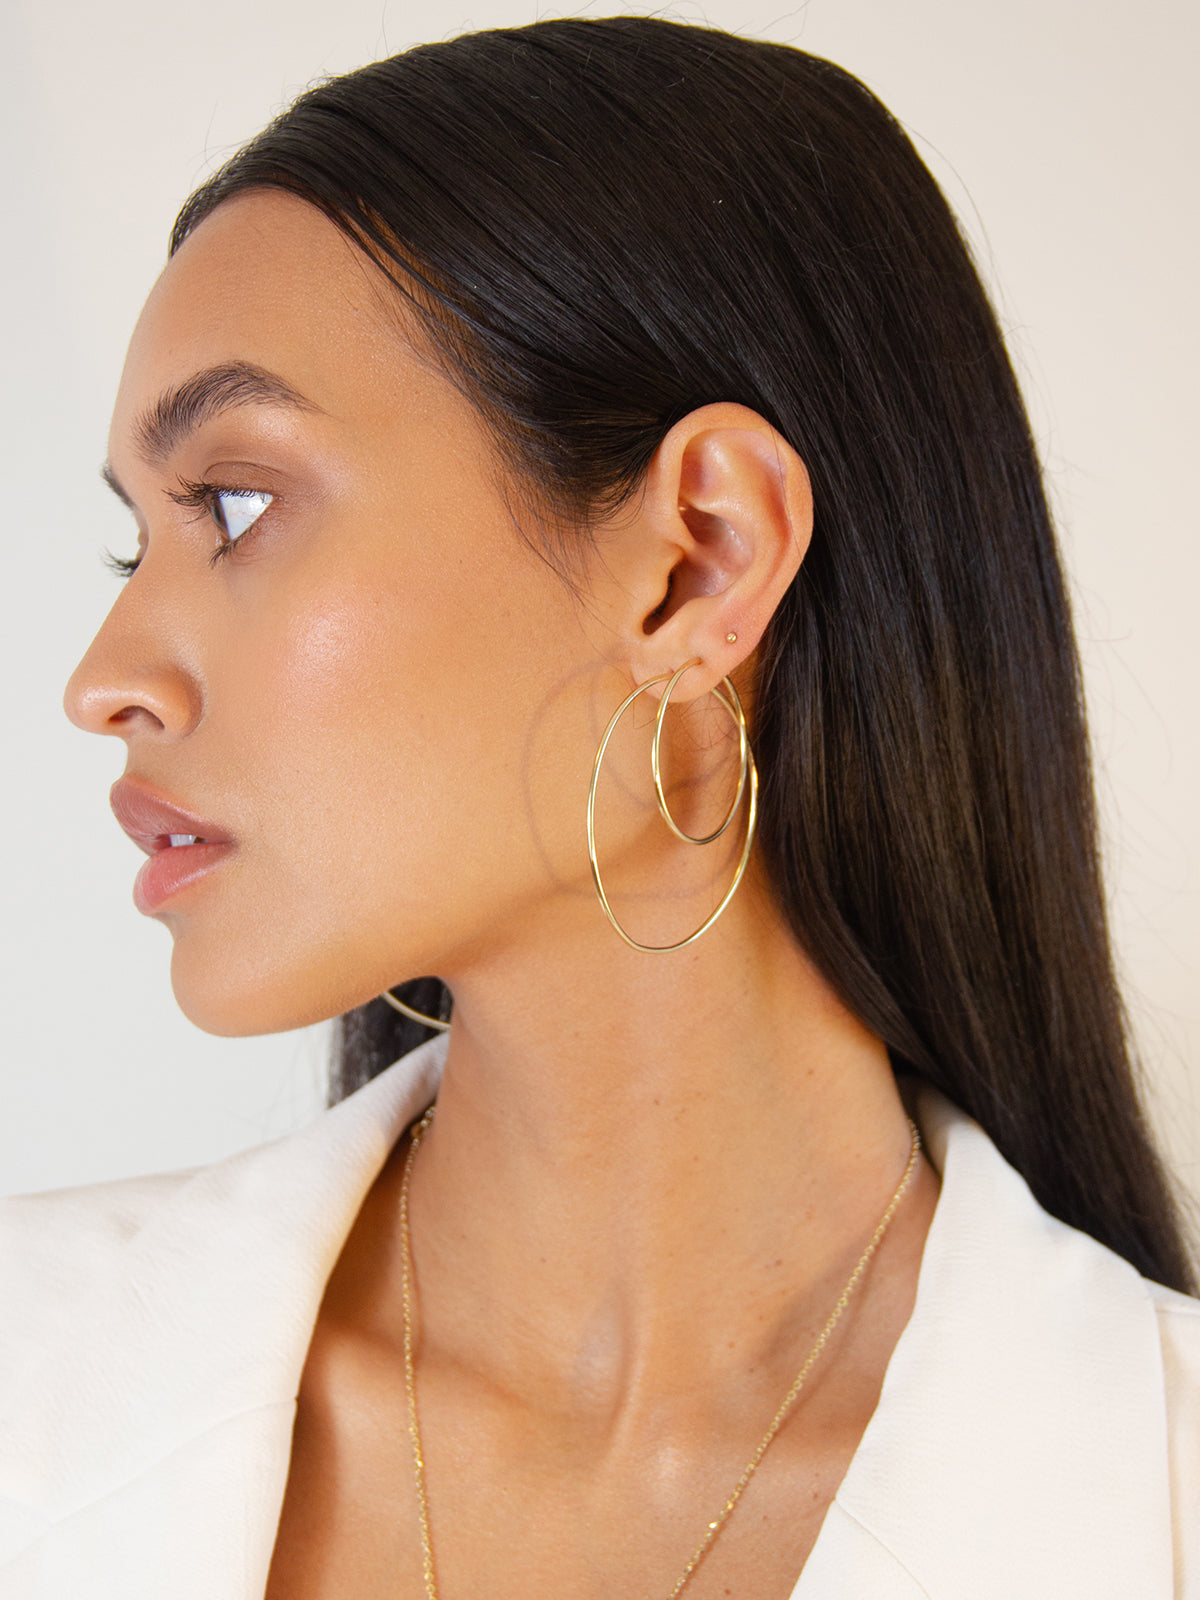 THE SMALL LIGHTWEIGHT HOOPS